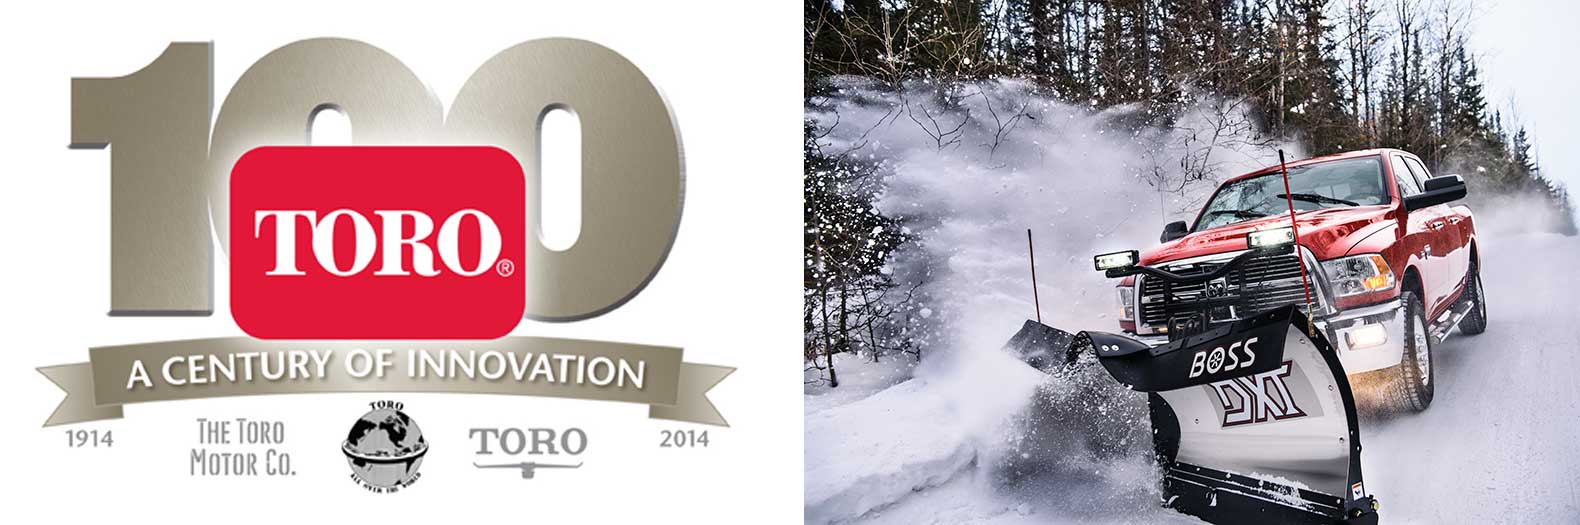 The Toro Company celebrates its Centennial and enters the professional snow and ice management business through the acquisition of BOSS Snowplow of Iron Mountain, Michigan.